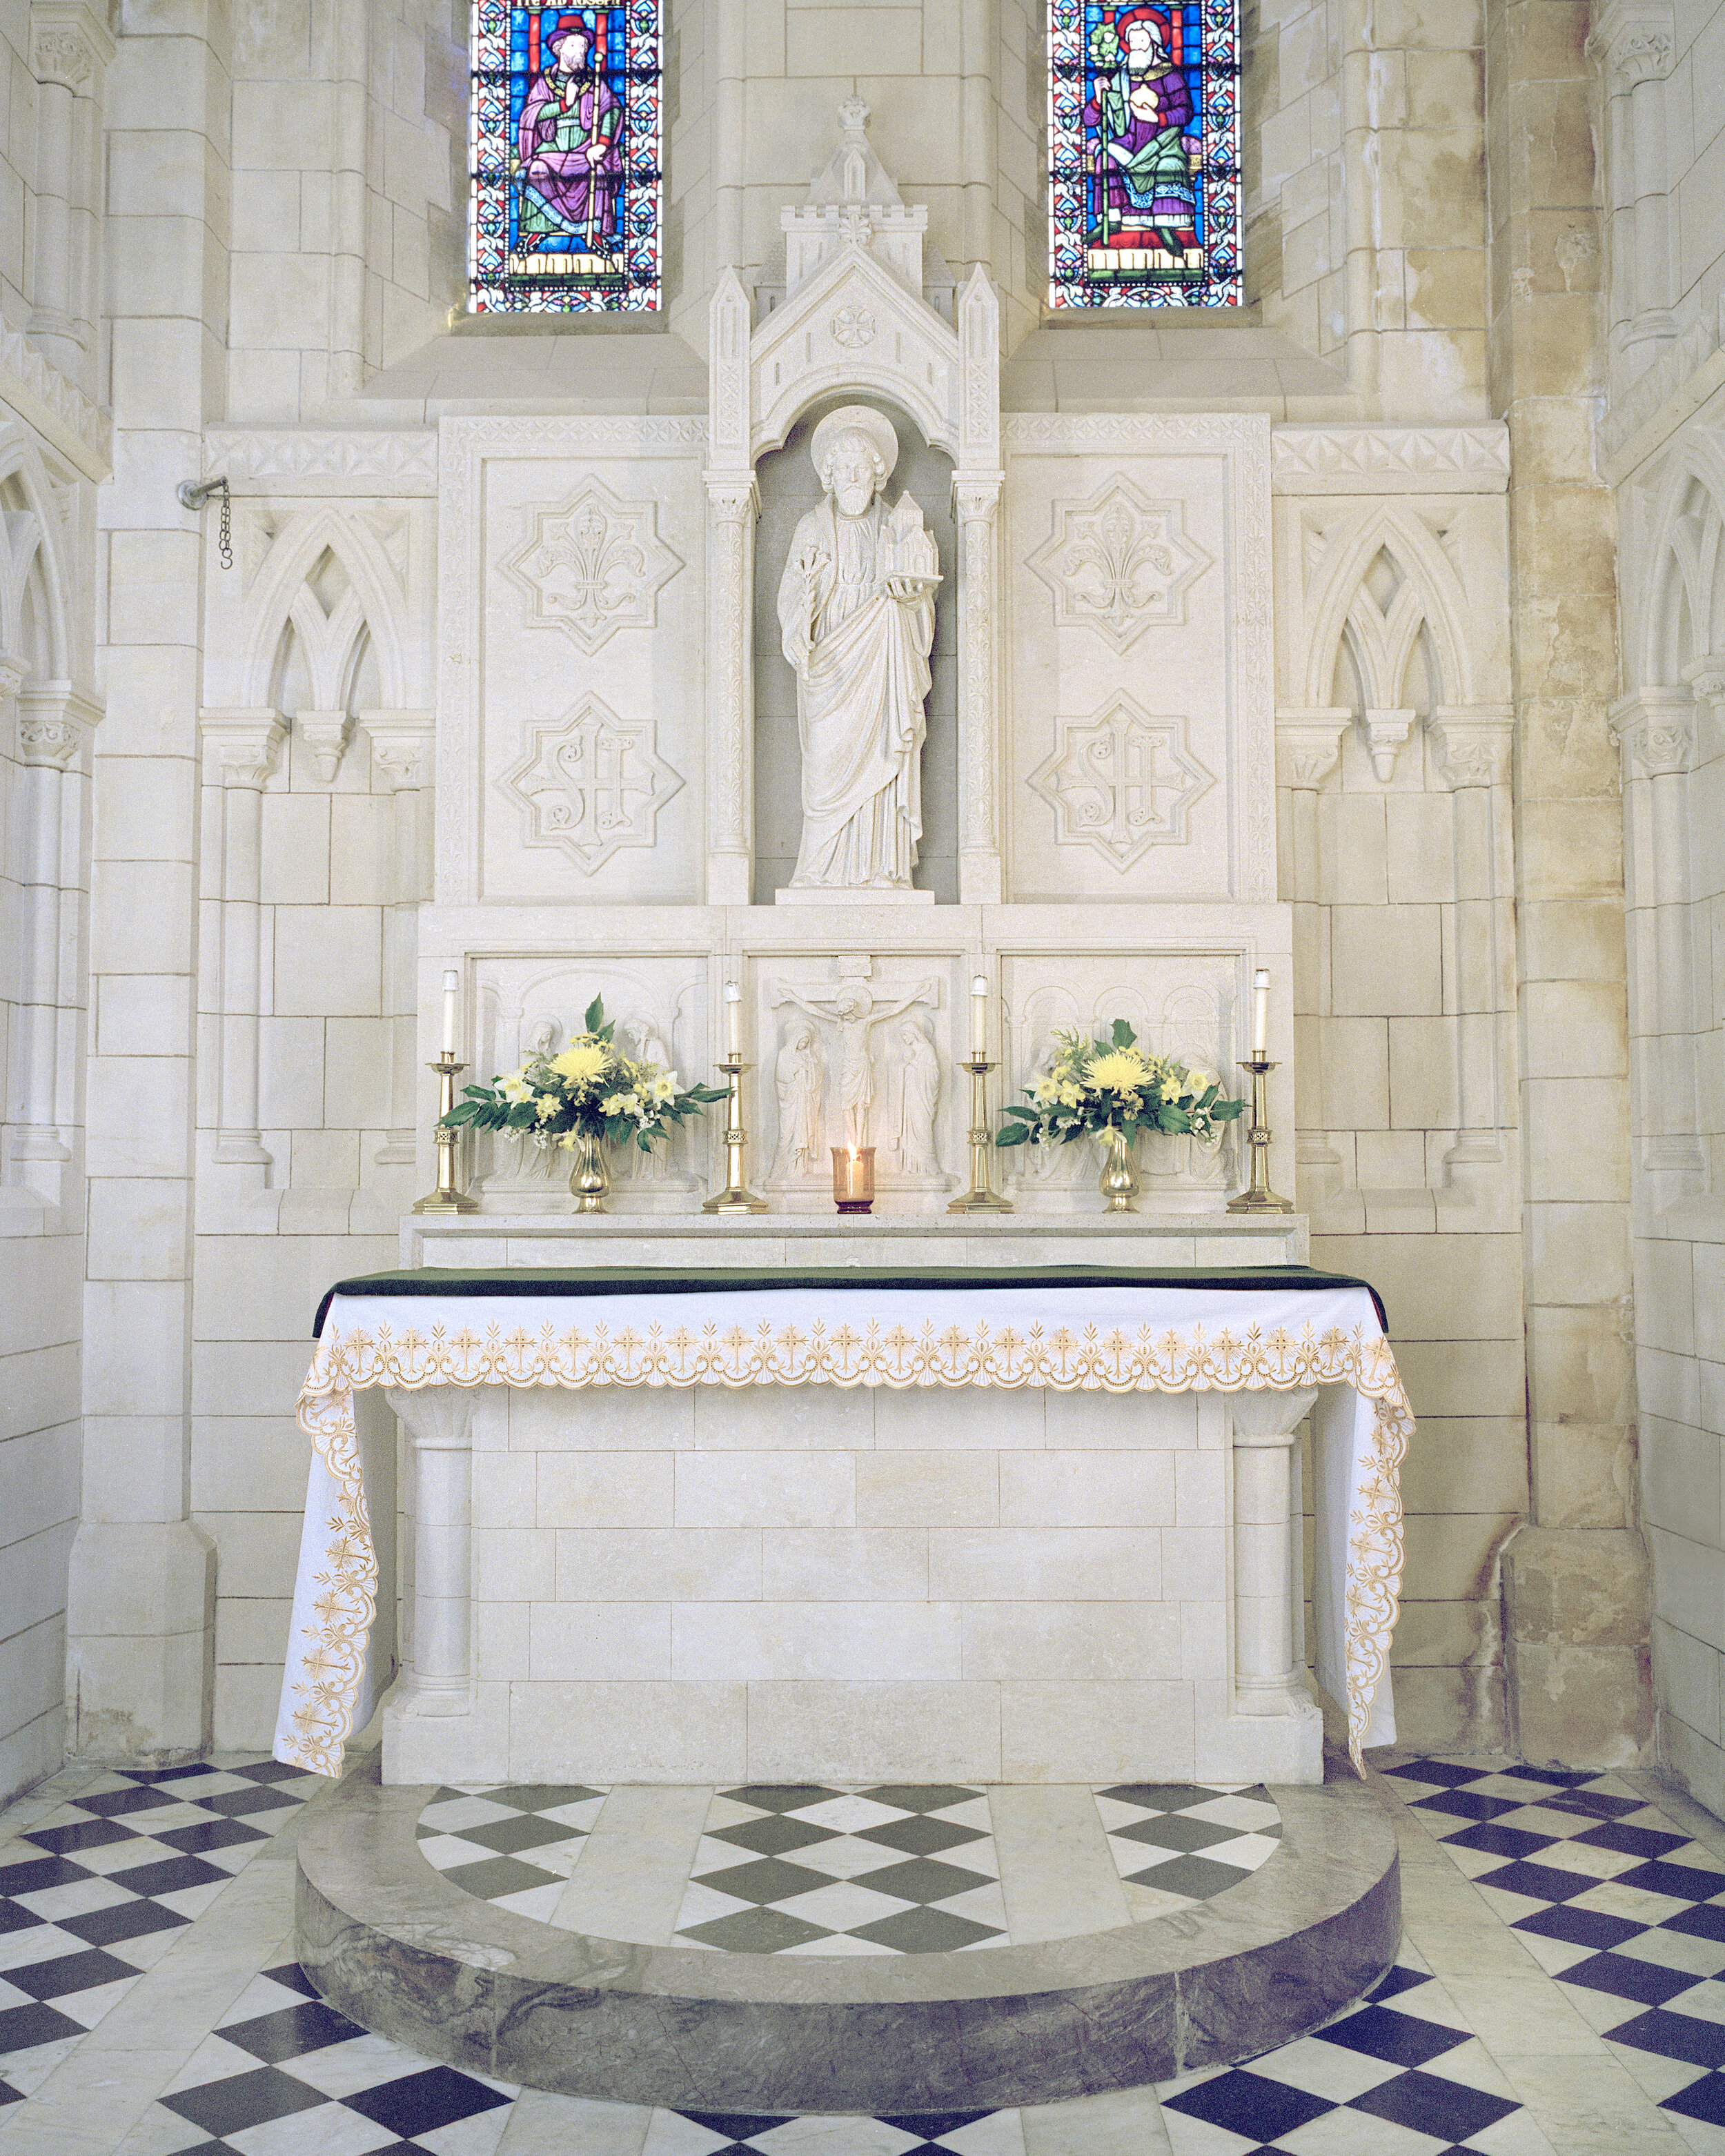   Personal  / Benedict’s House  Alter I, Buckfast Abbey  